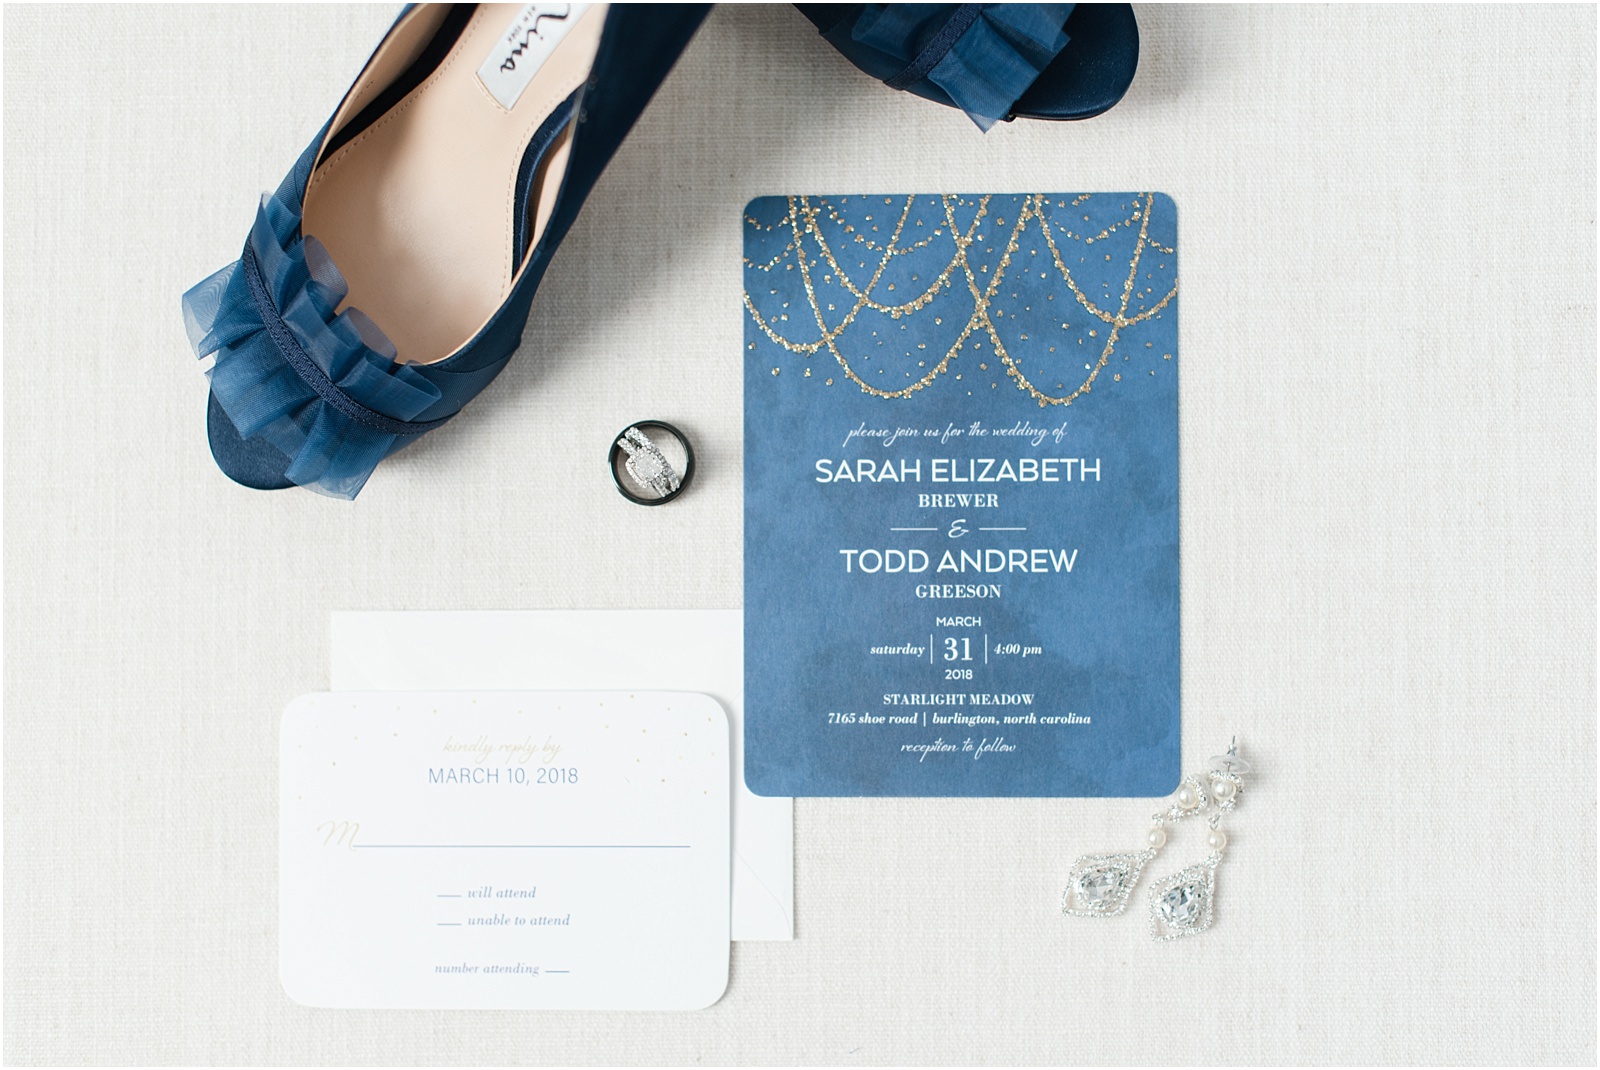 A Country Chic Starlight Meadows Wedding, Burlington NC, wedding details, wedding rings, wedding invitation suite, 